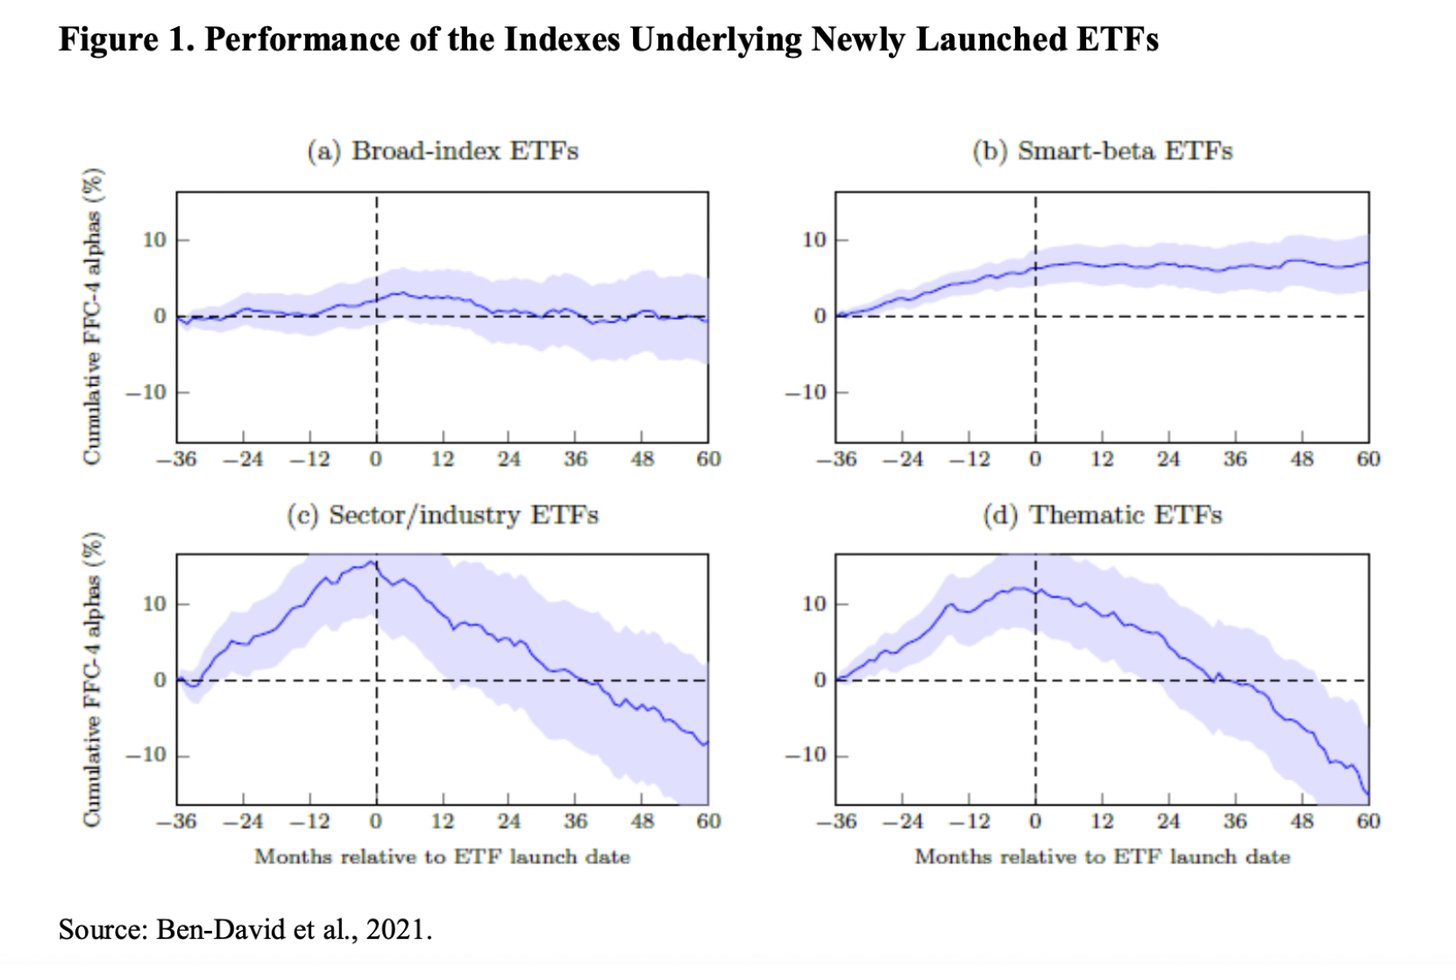 Performance Of Indexes Post Newly Launched ETFs